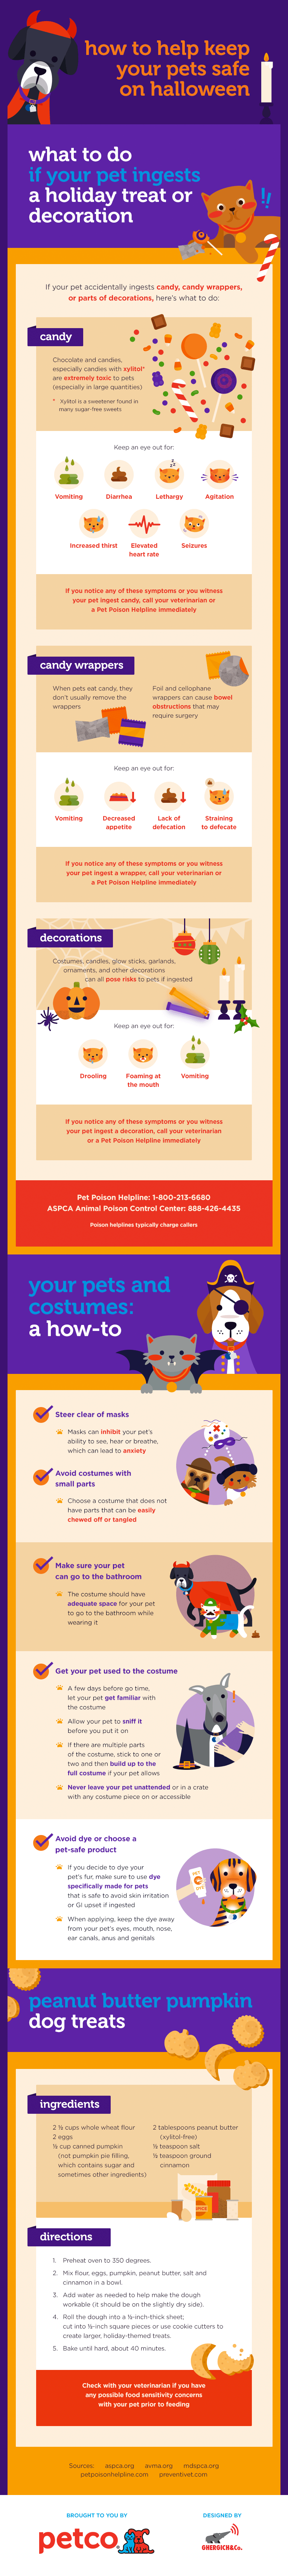 How to Keep Your Pet Safe on Halloween